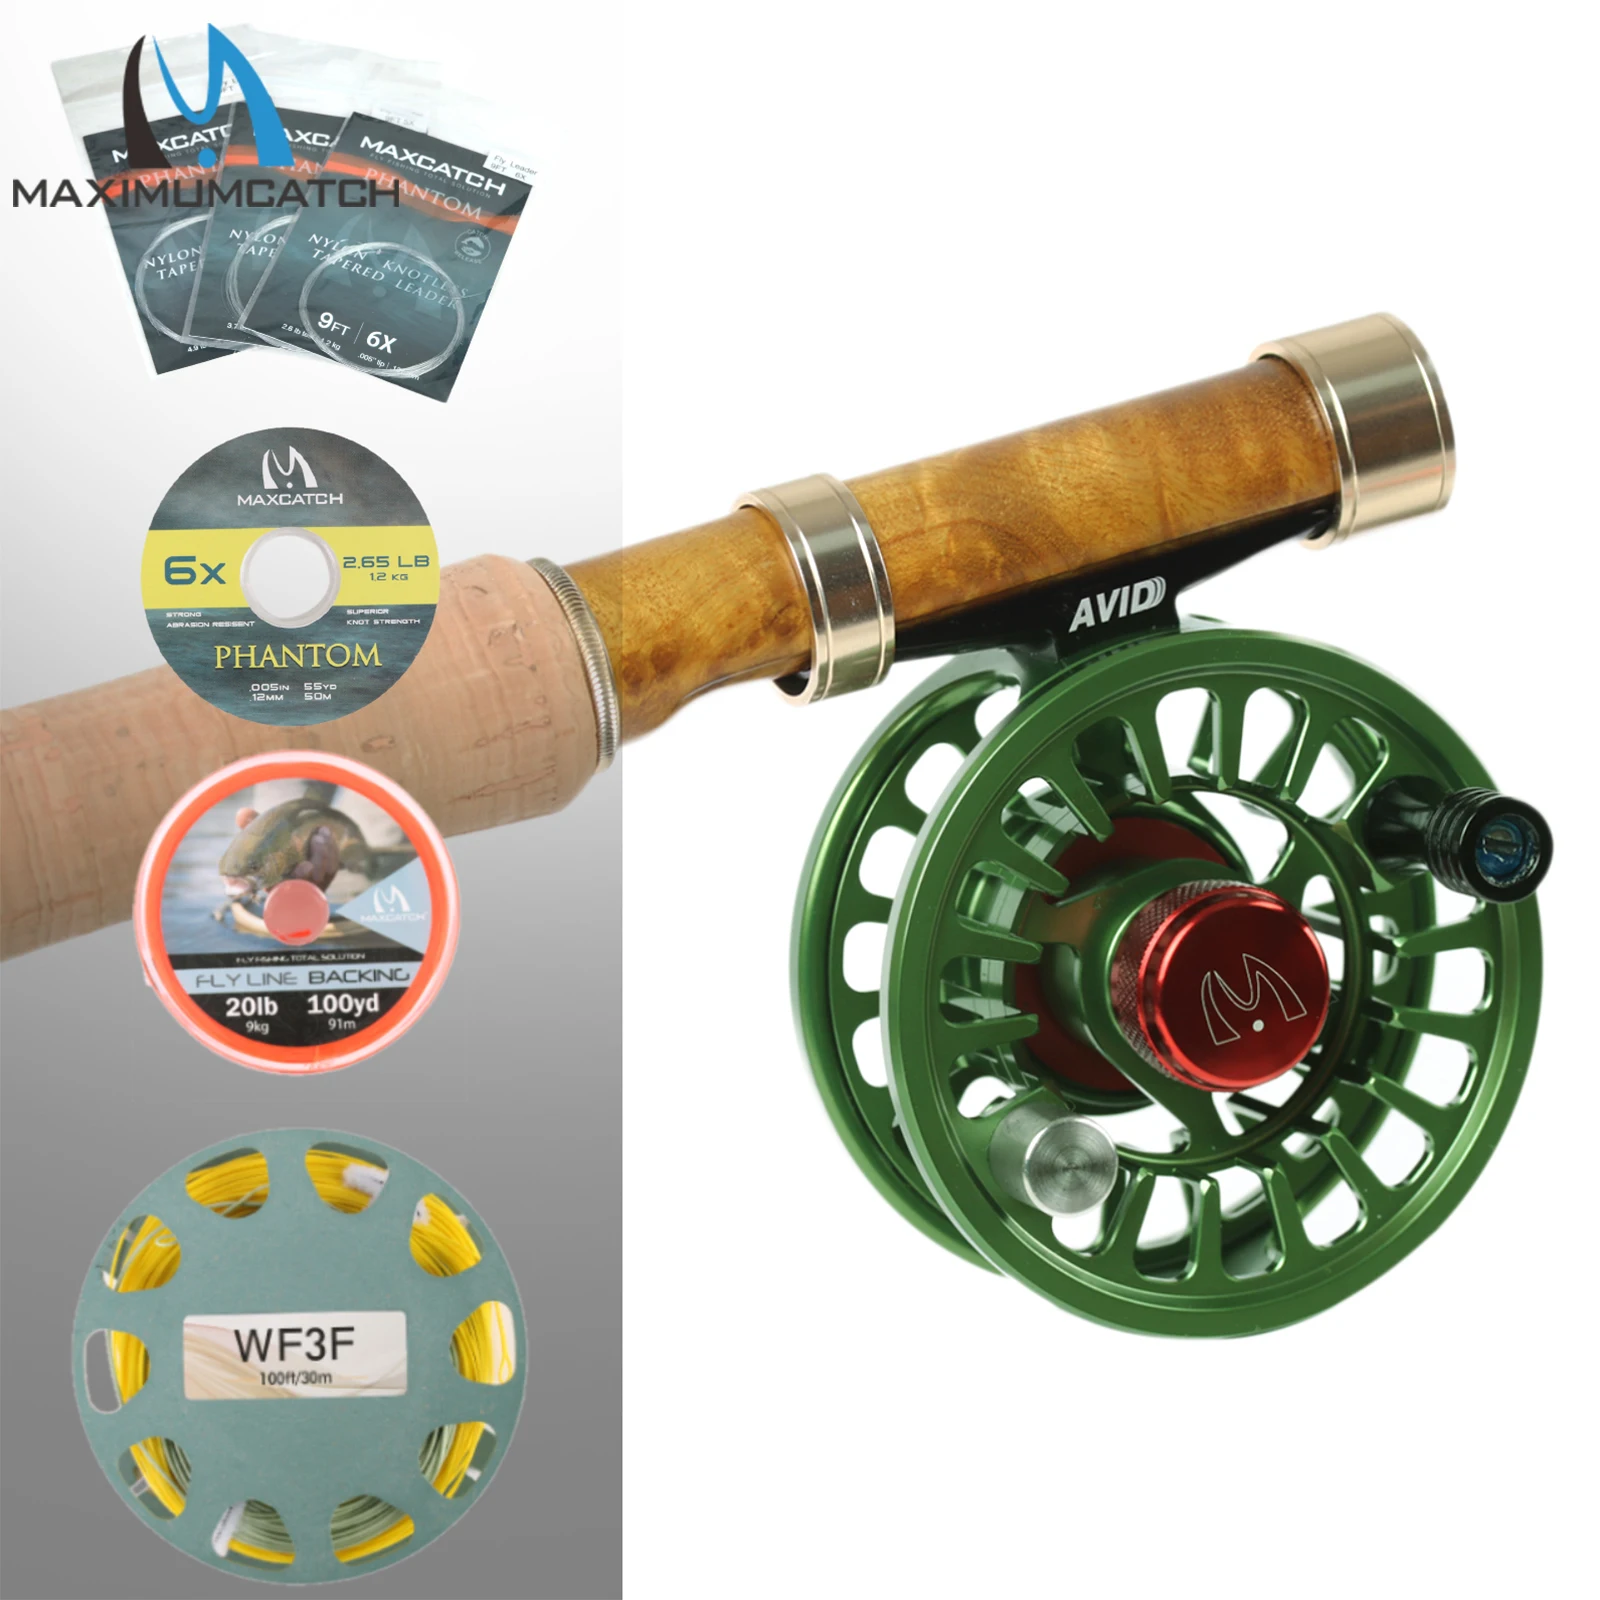 Maximumcatch Maxcatch v-feather Fly Fishing Rod and Reel Complete Kit Light Weight Small Stream Creek